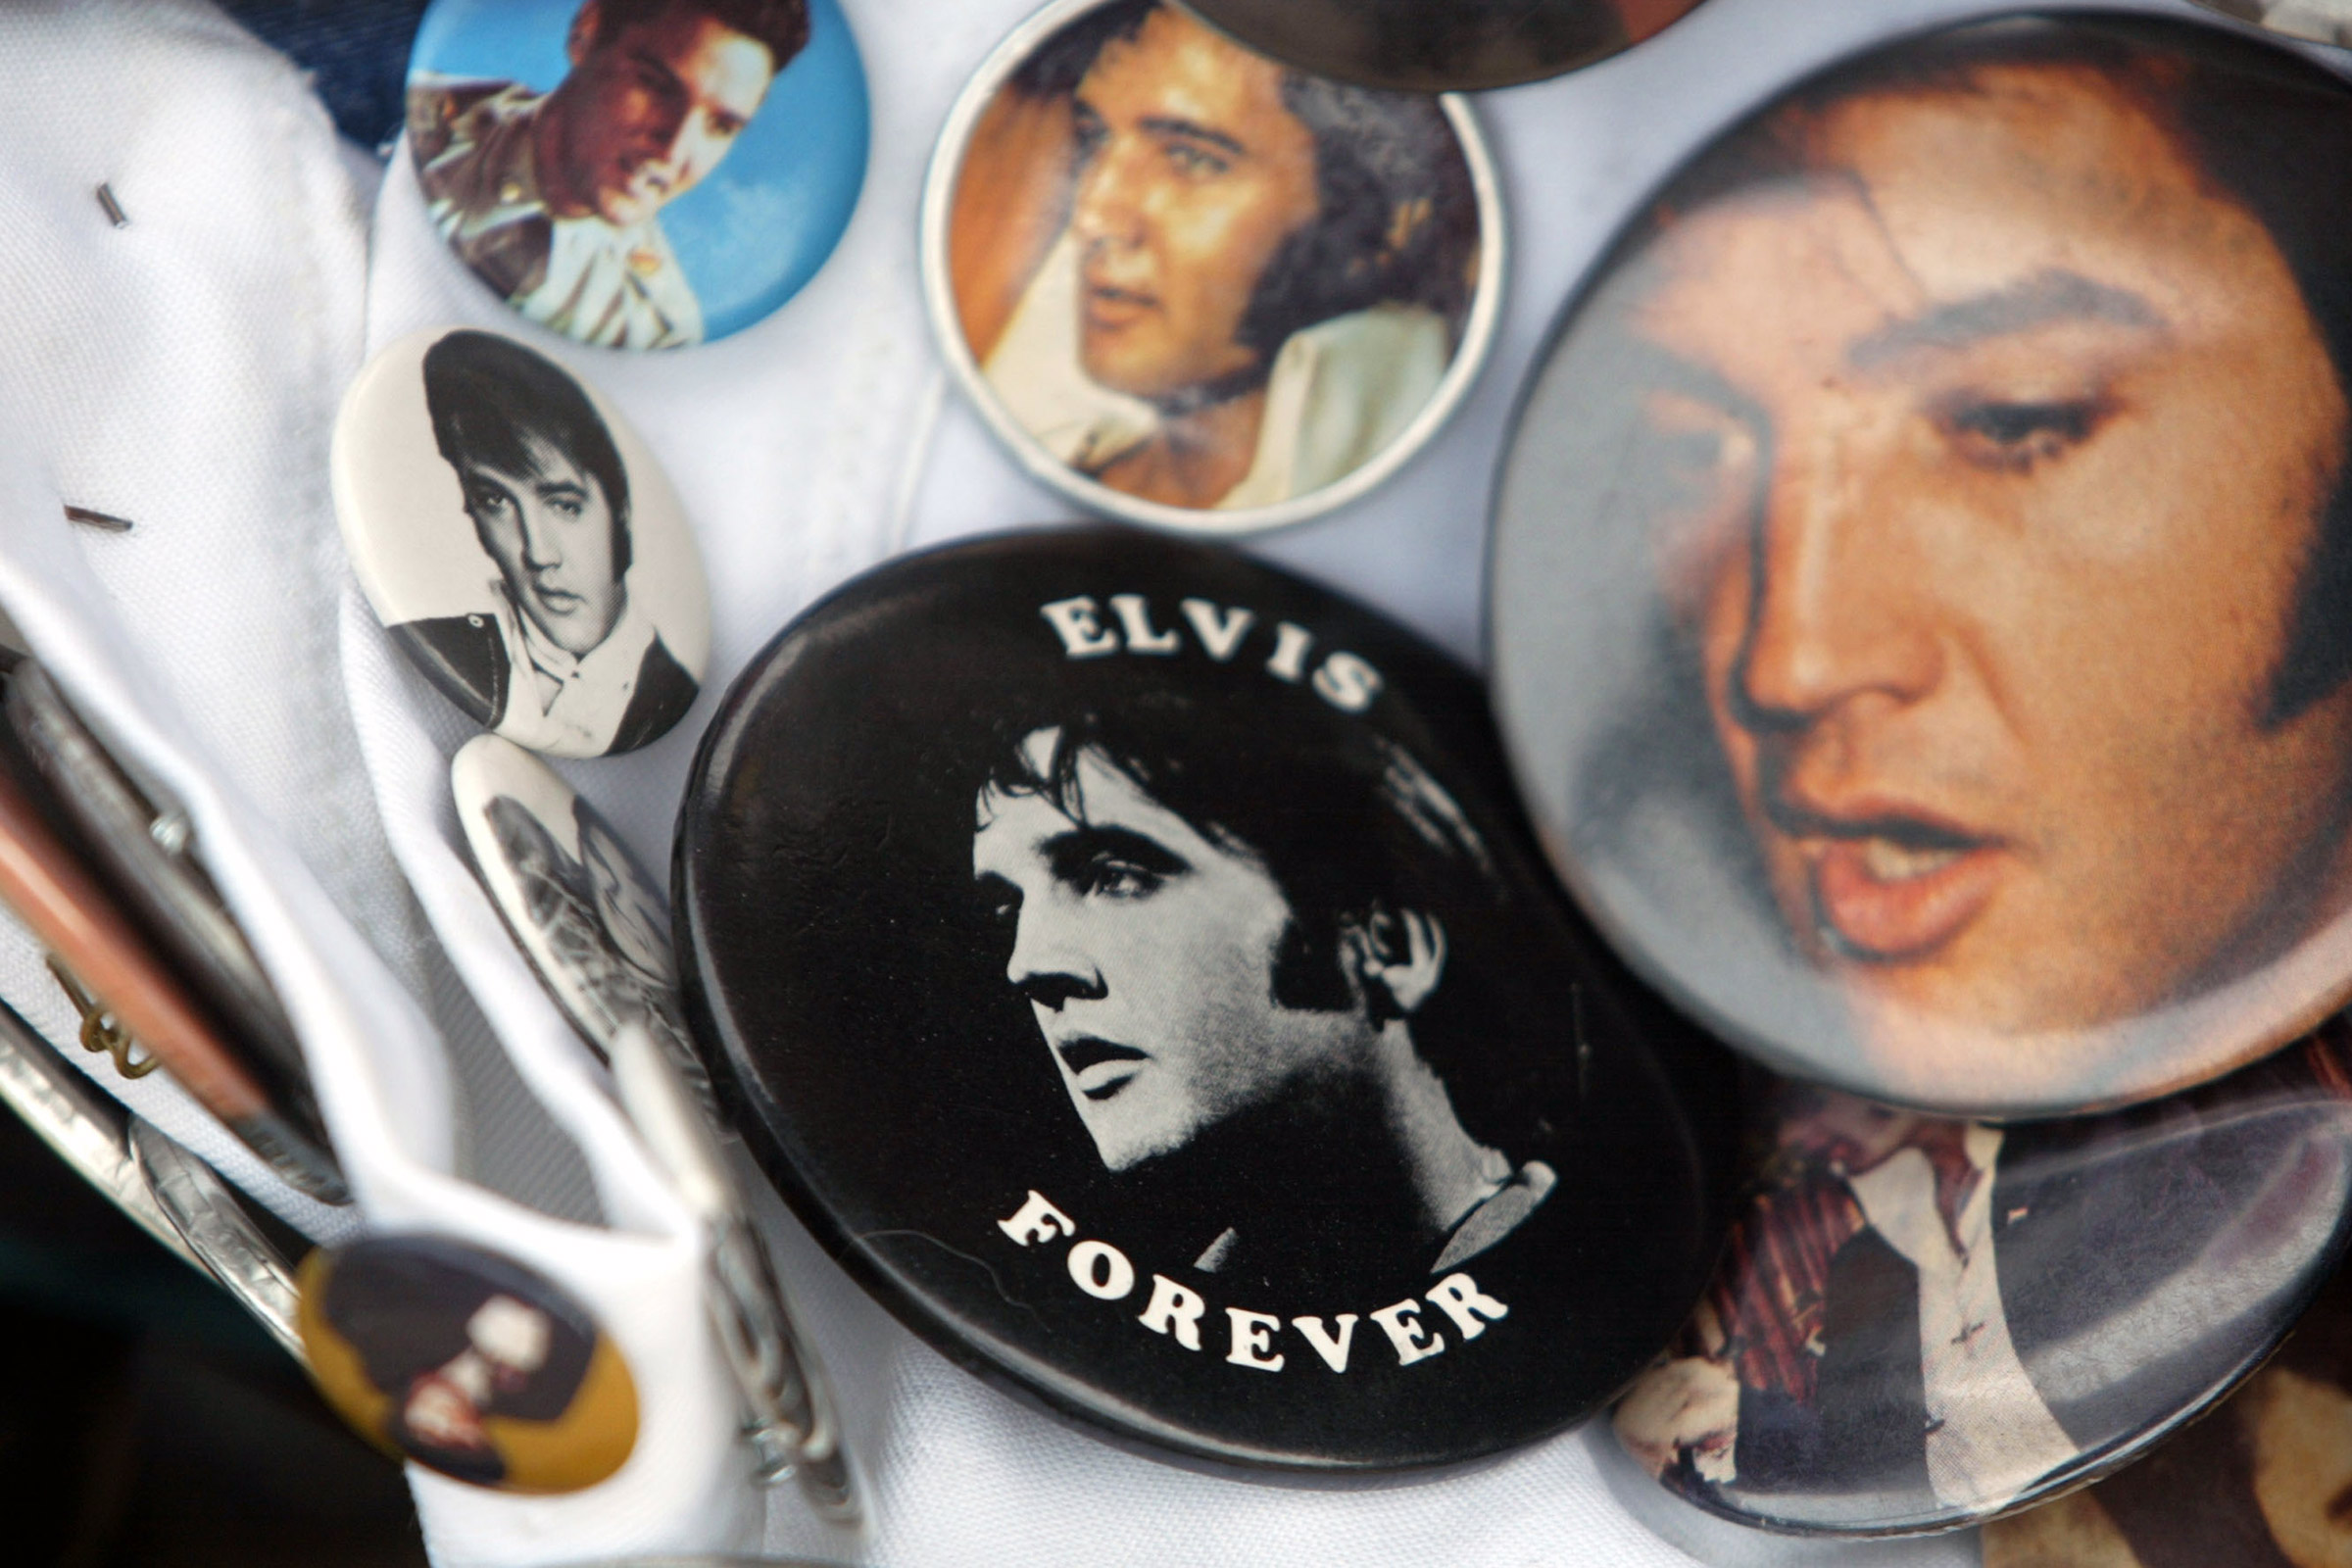 In 2022, the many faces of Elvis form a sun mosaic that raises more questions than it answers (Mario Tama—Getty Images)